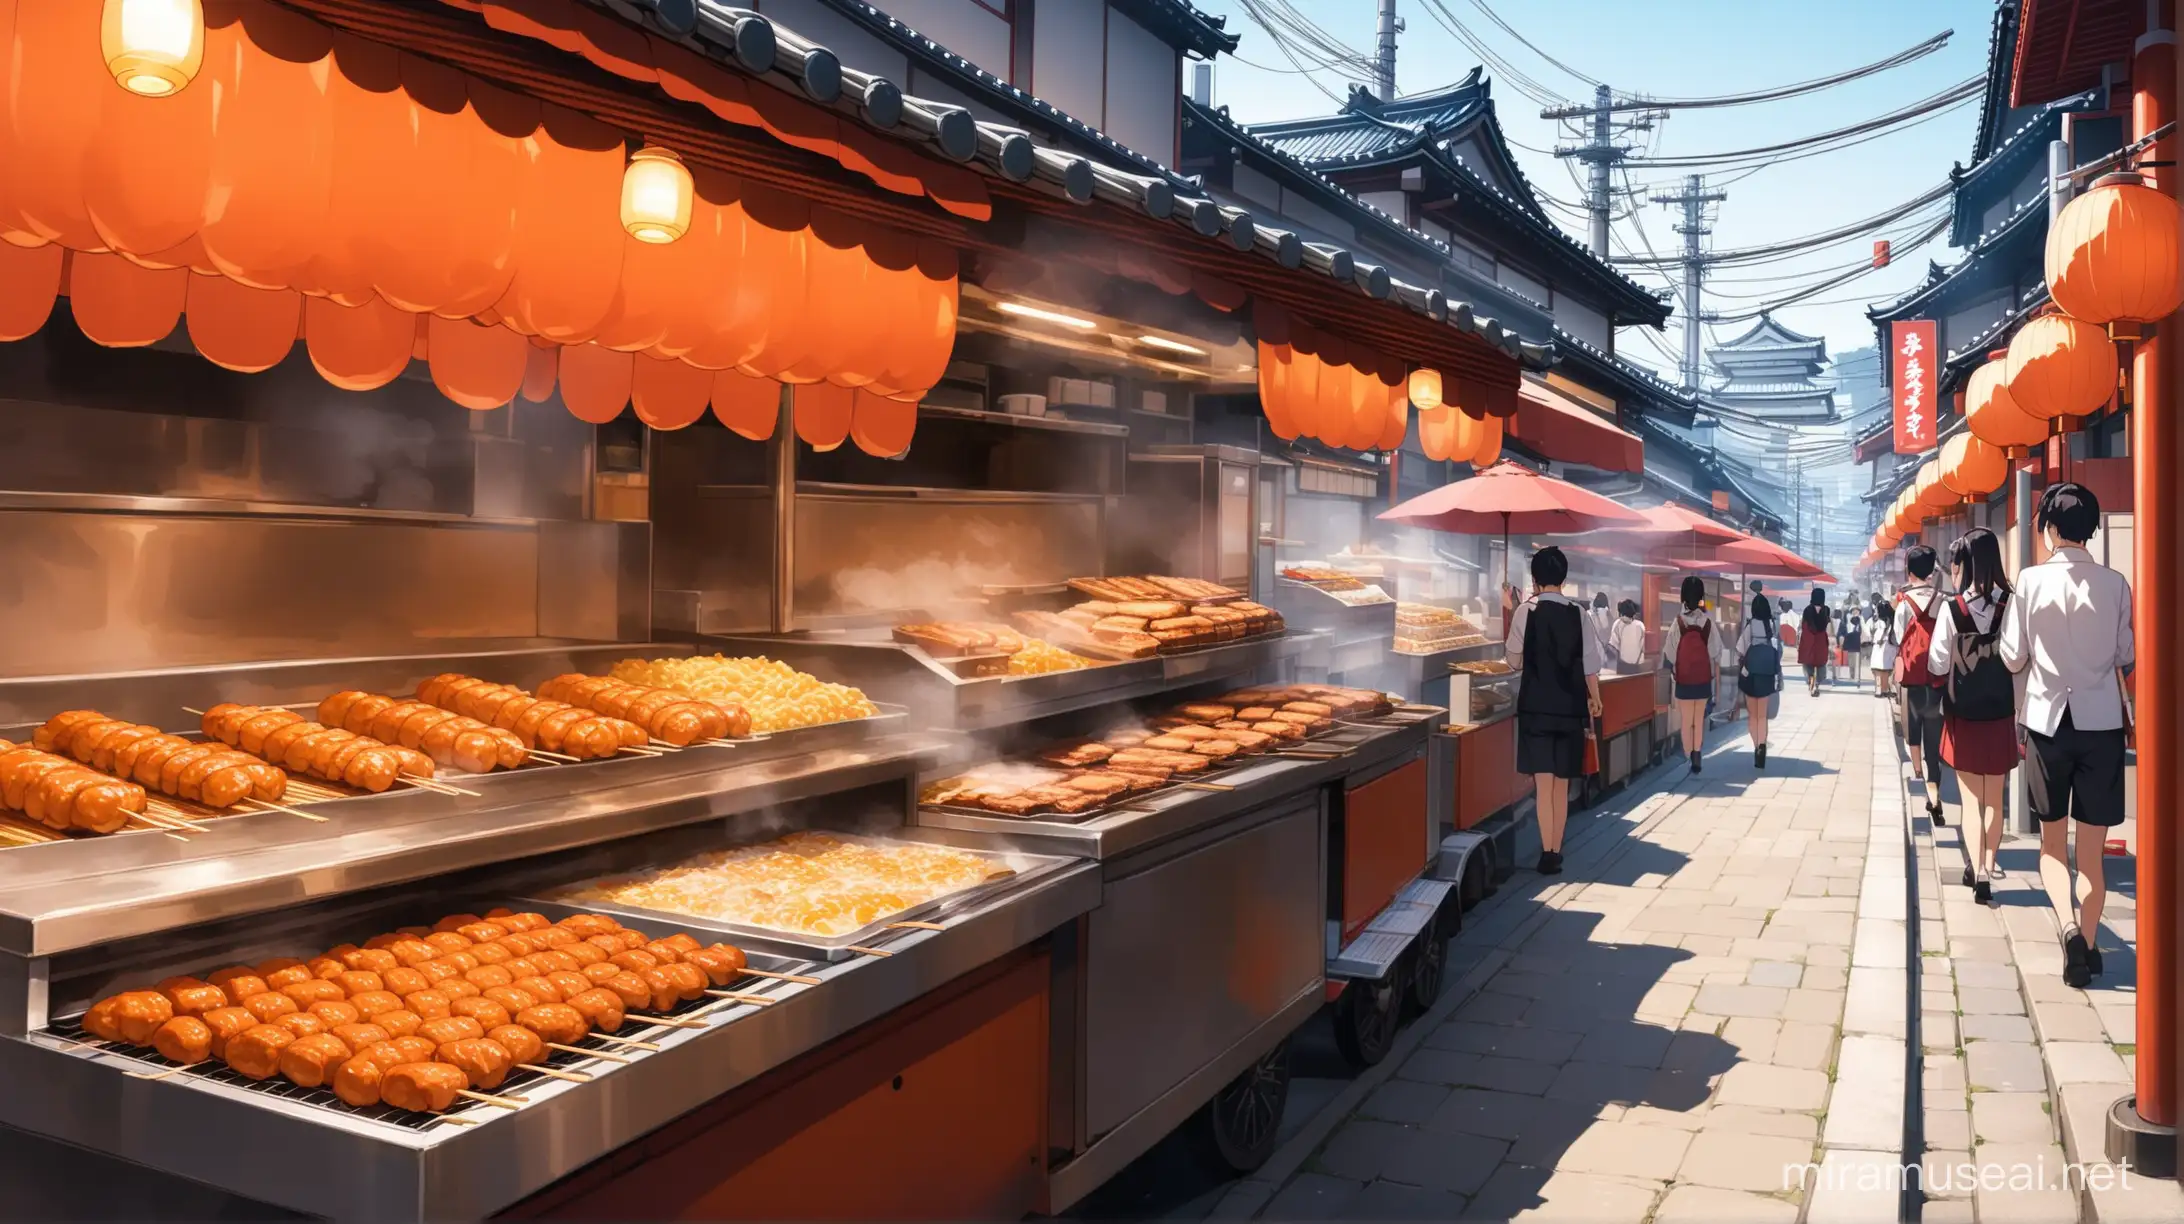 Colorful Japanese Street Food Stall from a Unique Perspective